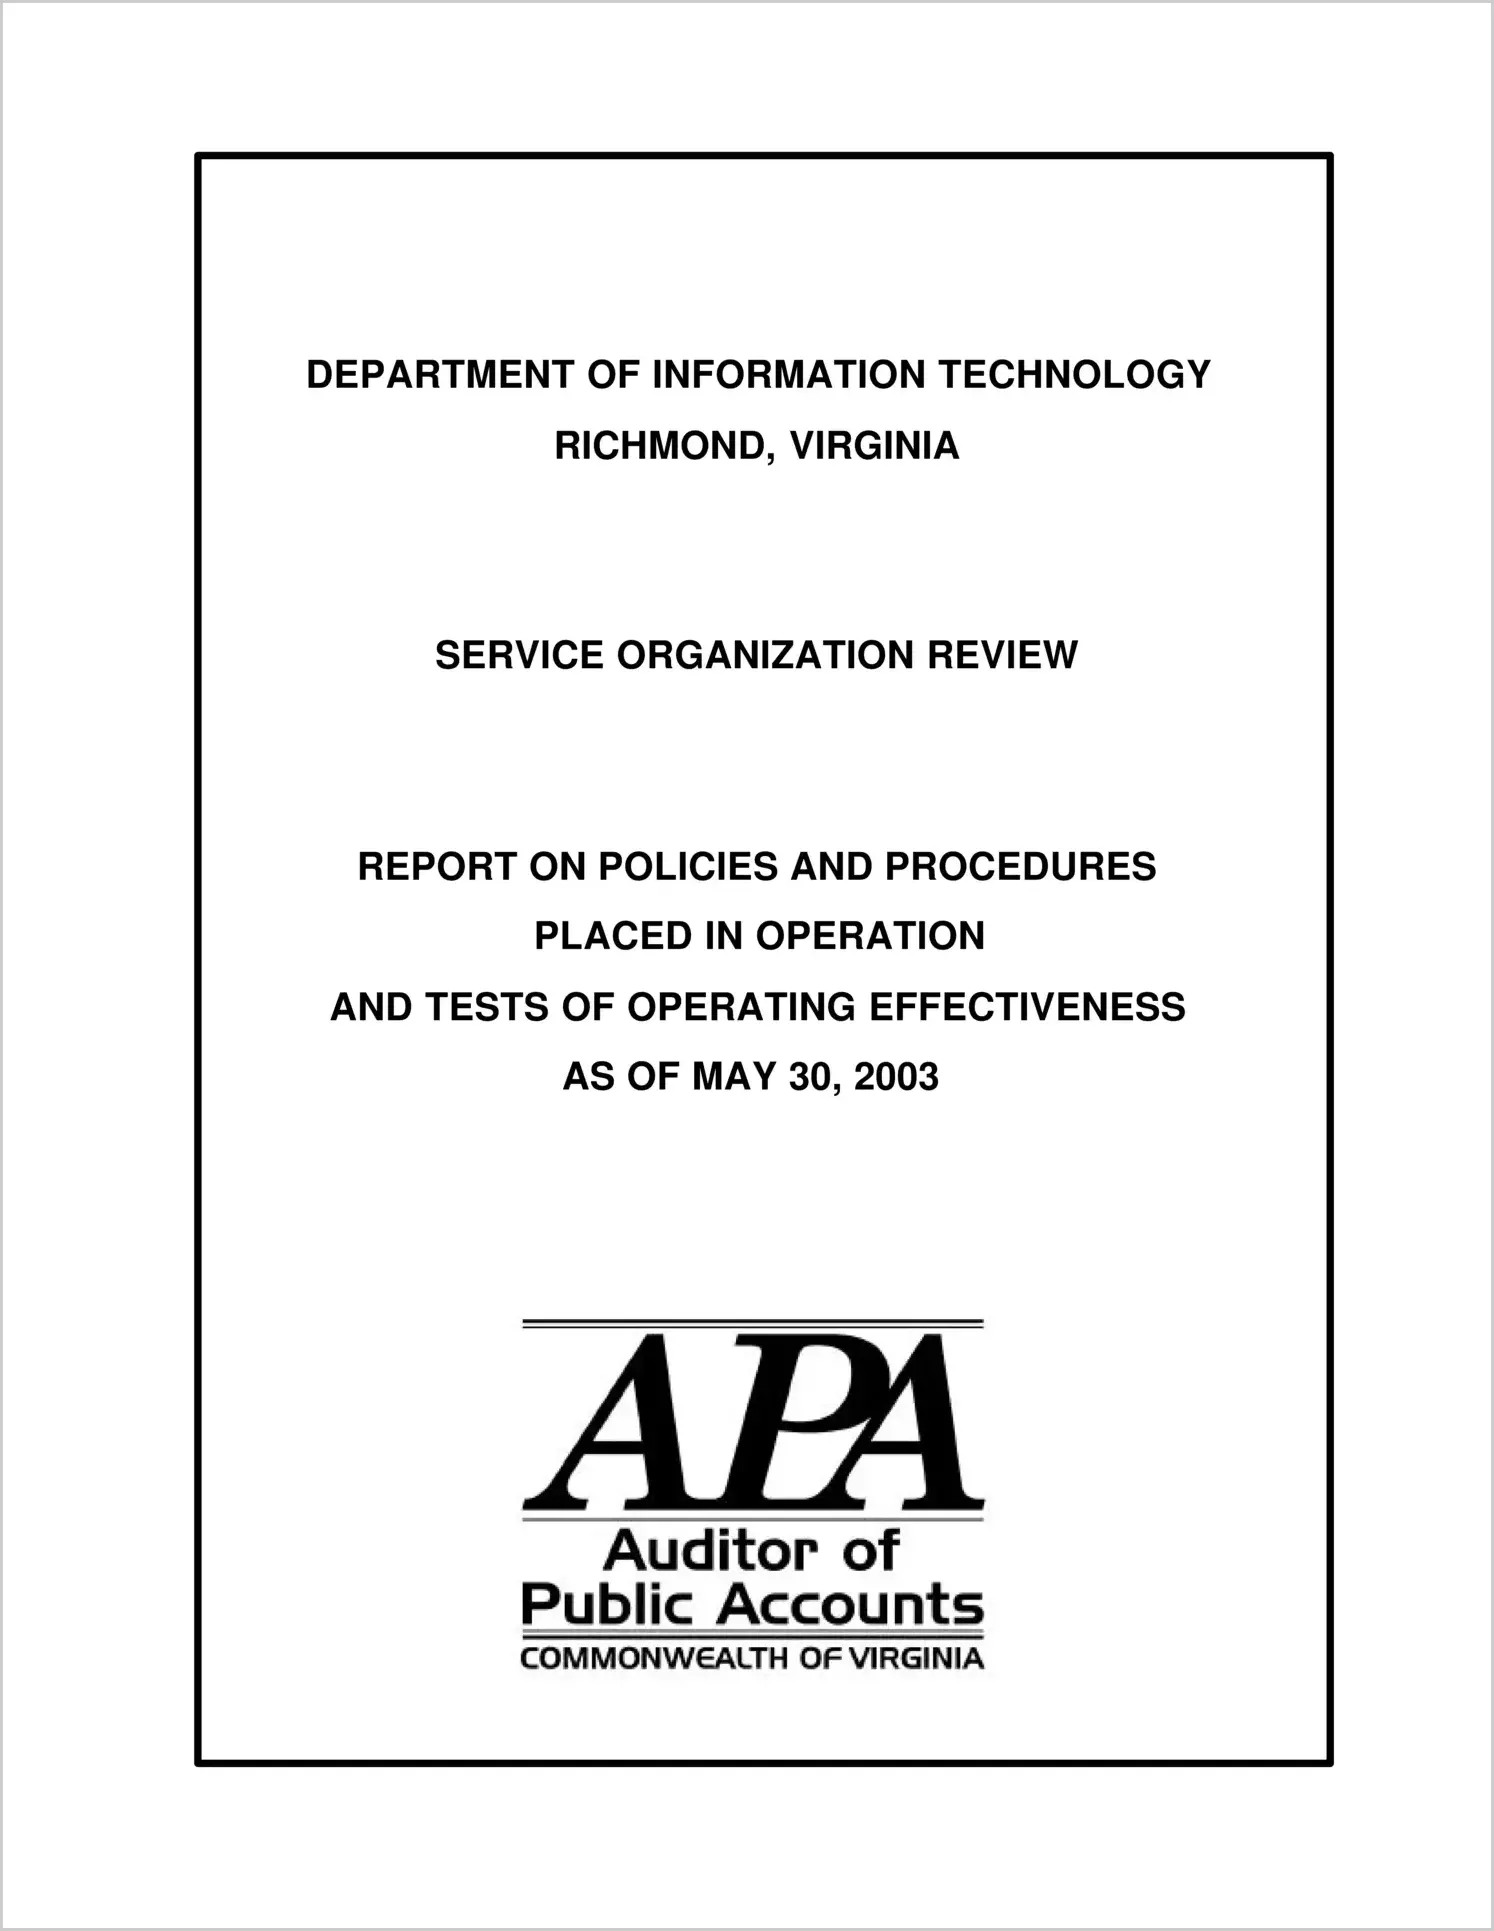 Special ReportDepartment of Information Technology, Service Organization Review, Report on Policies and Procedures Placed in Operation and Tests ofOperating Effectiveness as of May 30, 2003(Report Date: 5/30/03)